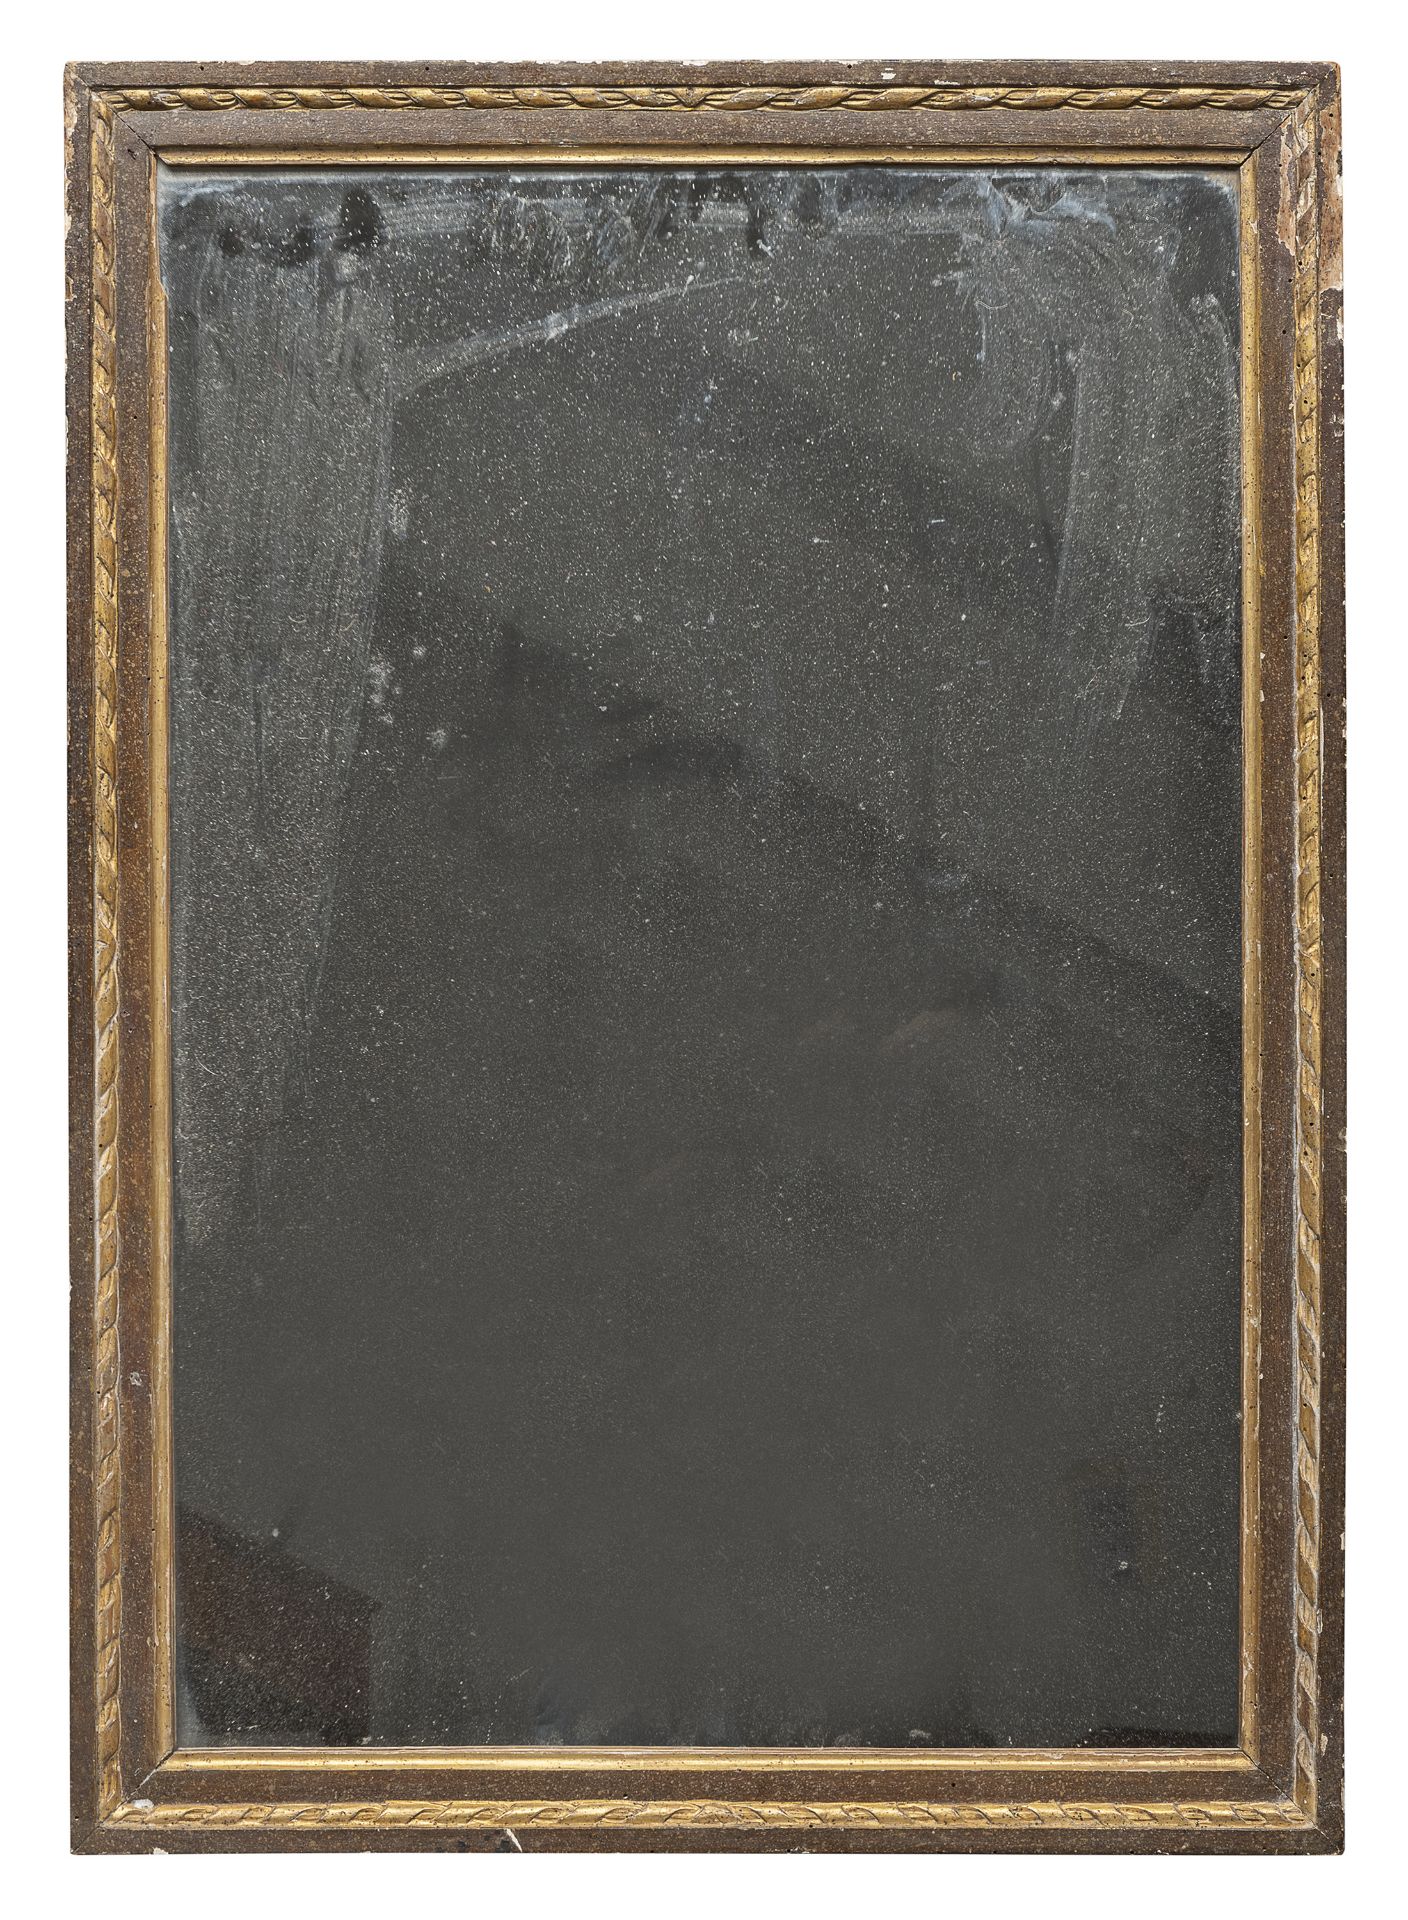 LACQUERED WOOD MIRROR EARLY 19TH CENTURY